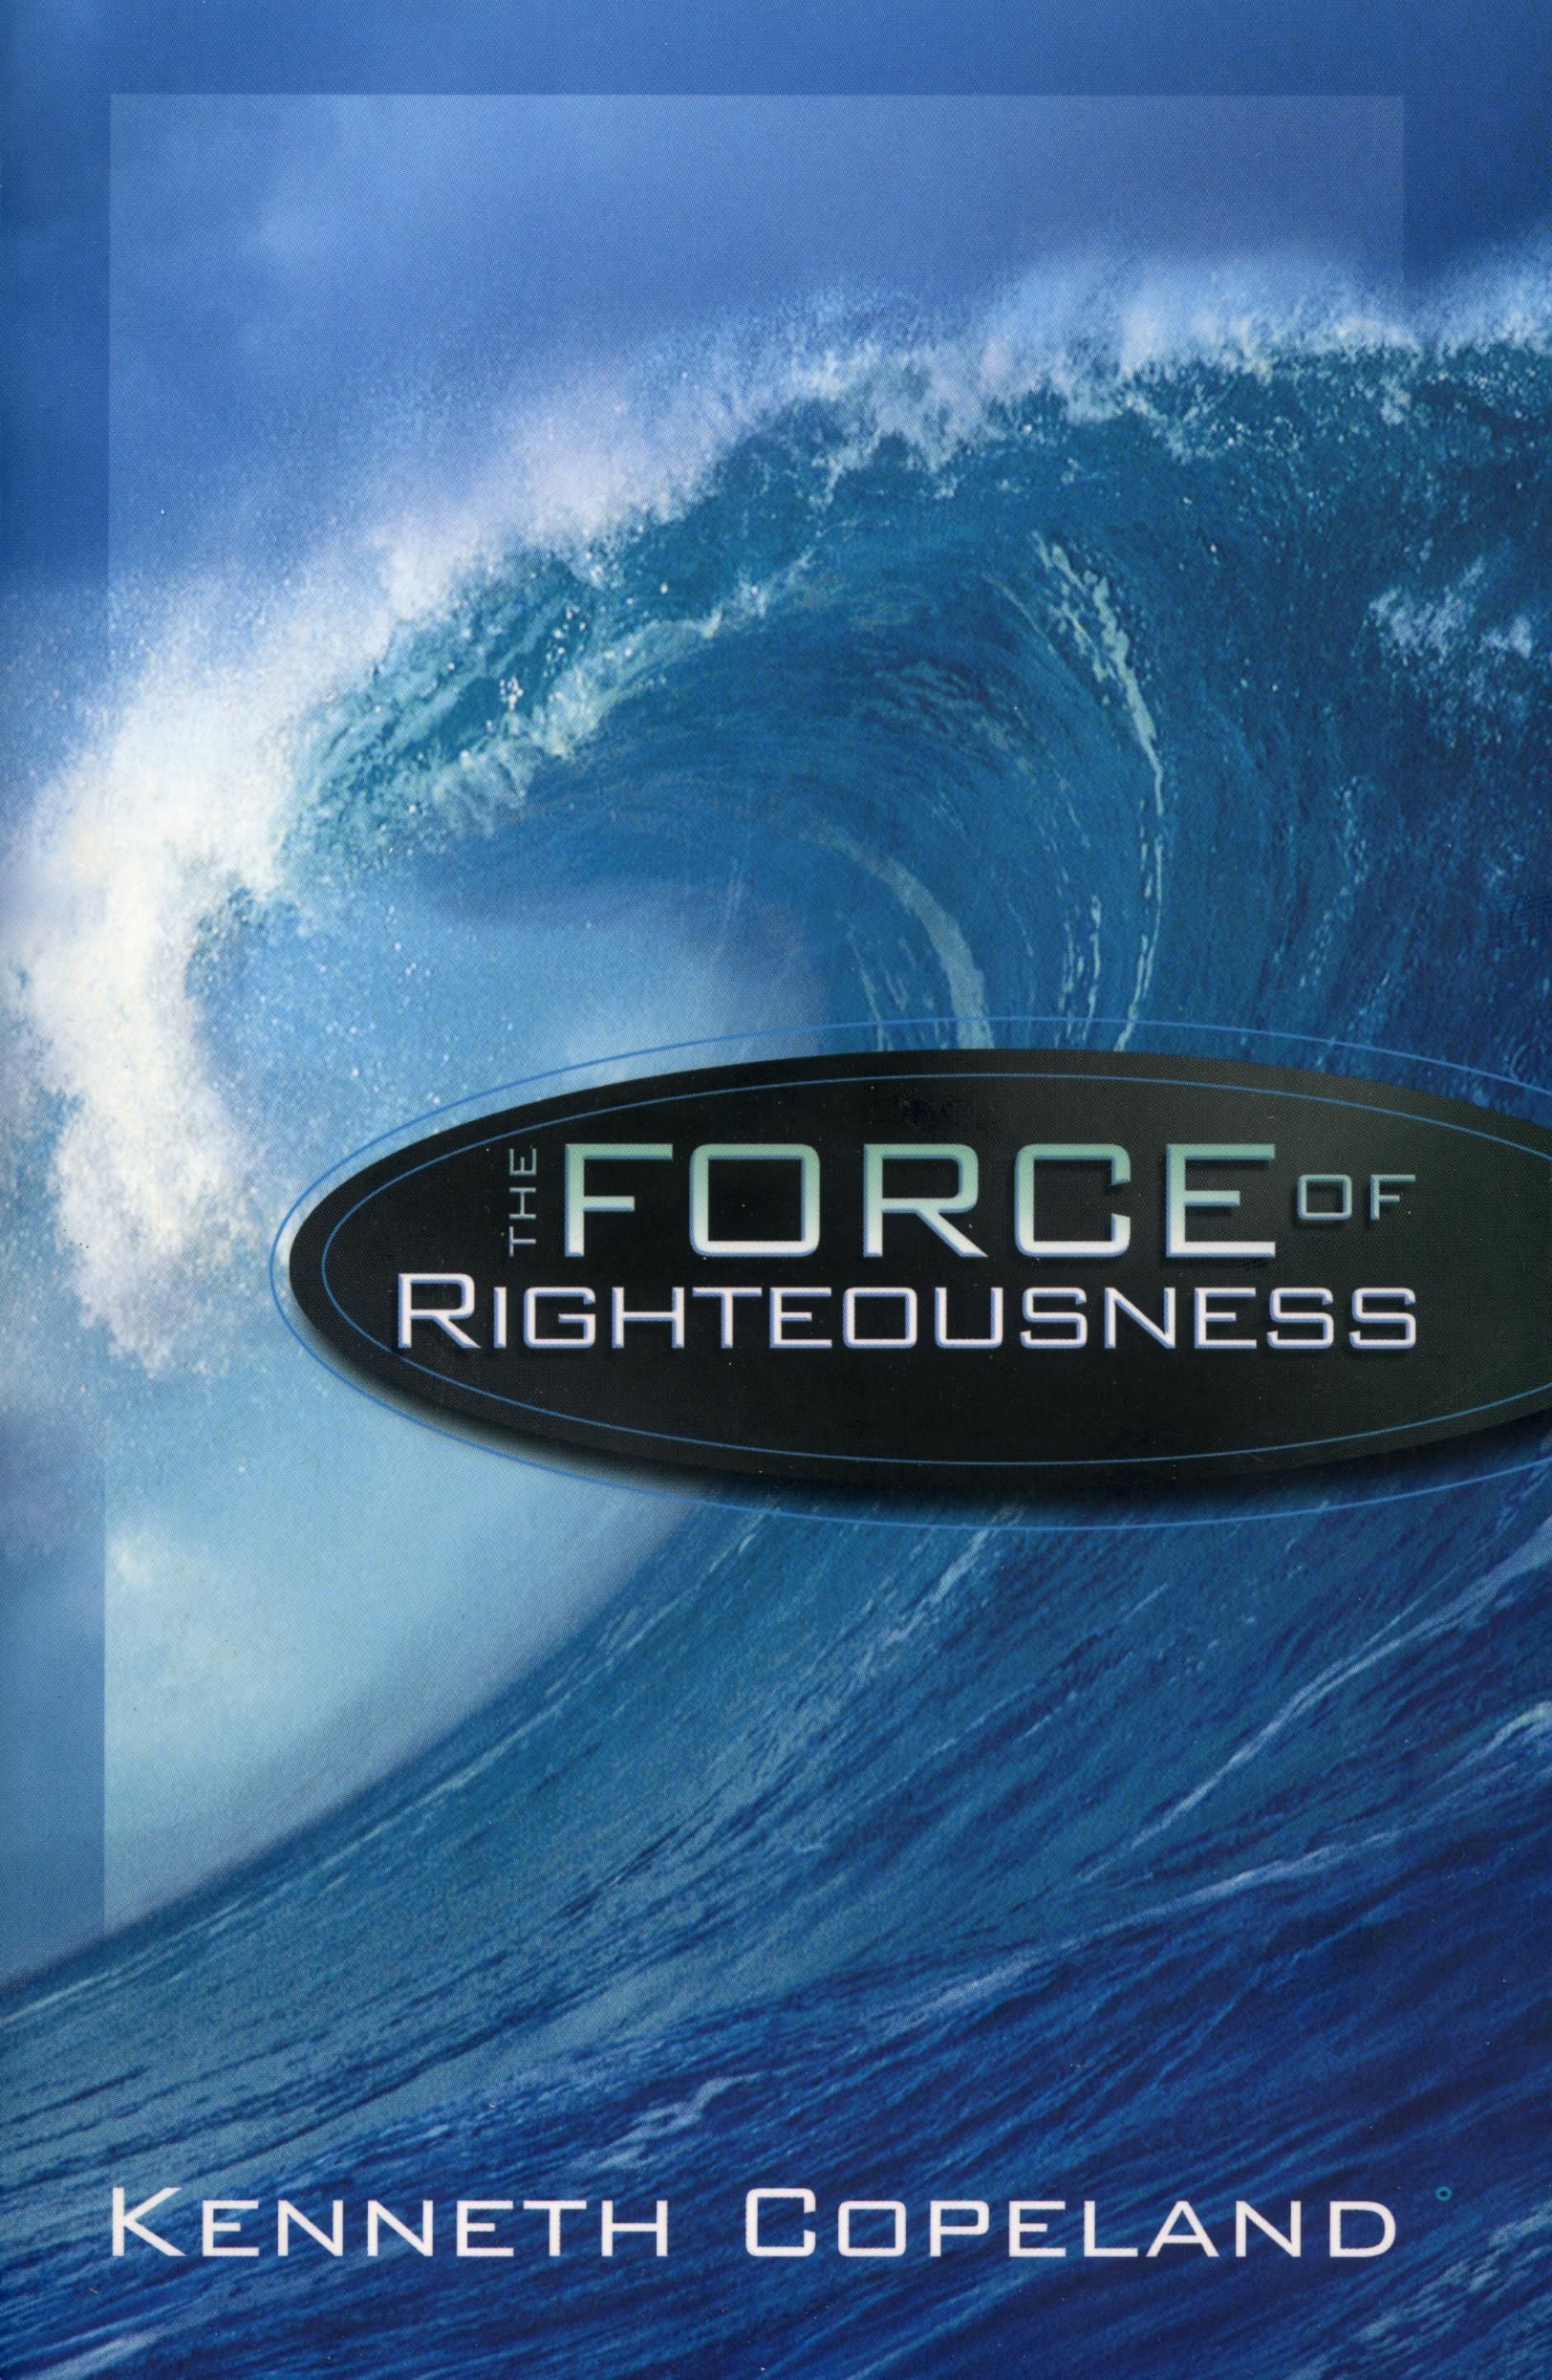 K. Copeland: The Force of Righteousness